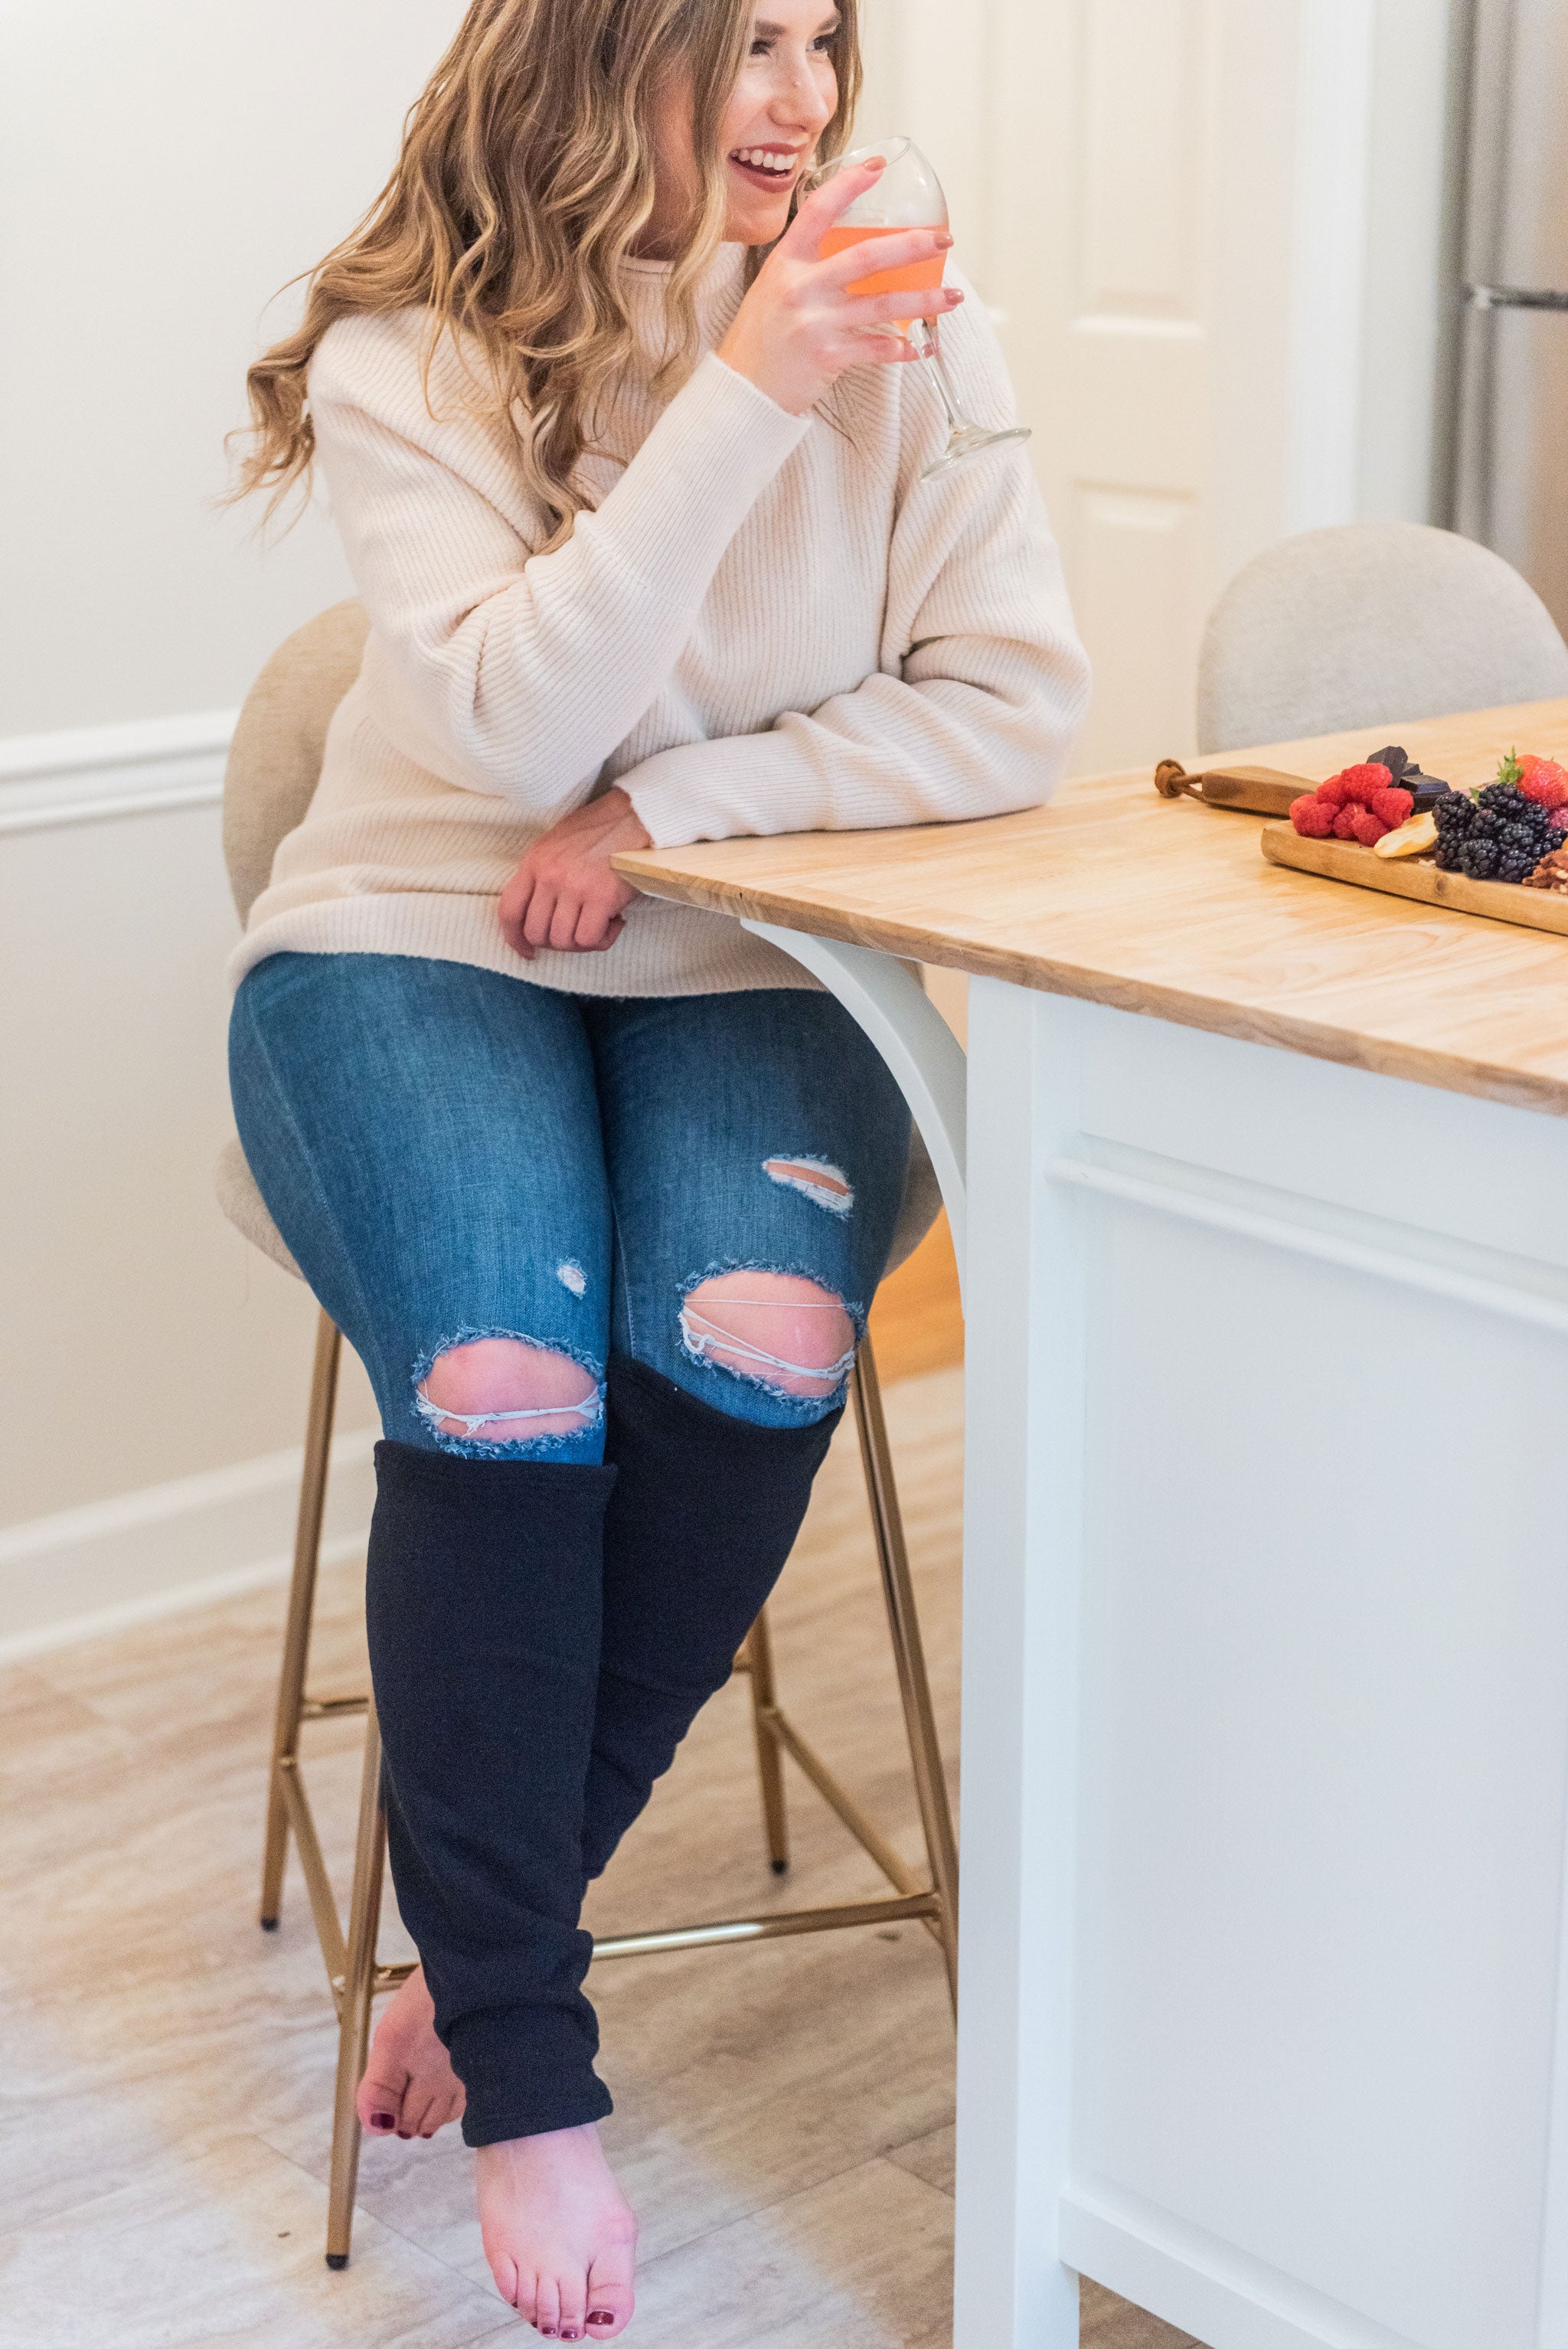 woman in beige sweater and jeans with black leg warmers cover her legs below the knees. She is smiling while holding a glass of rose wine, sitting at a bar stool with a plate of fruit next to her. 